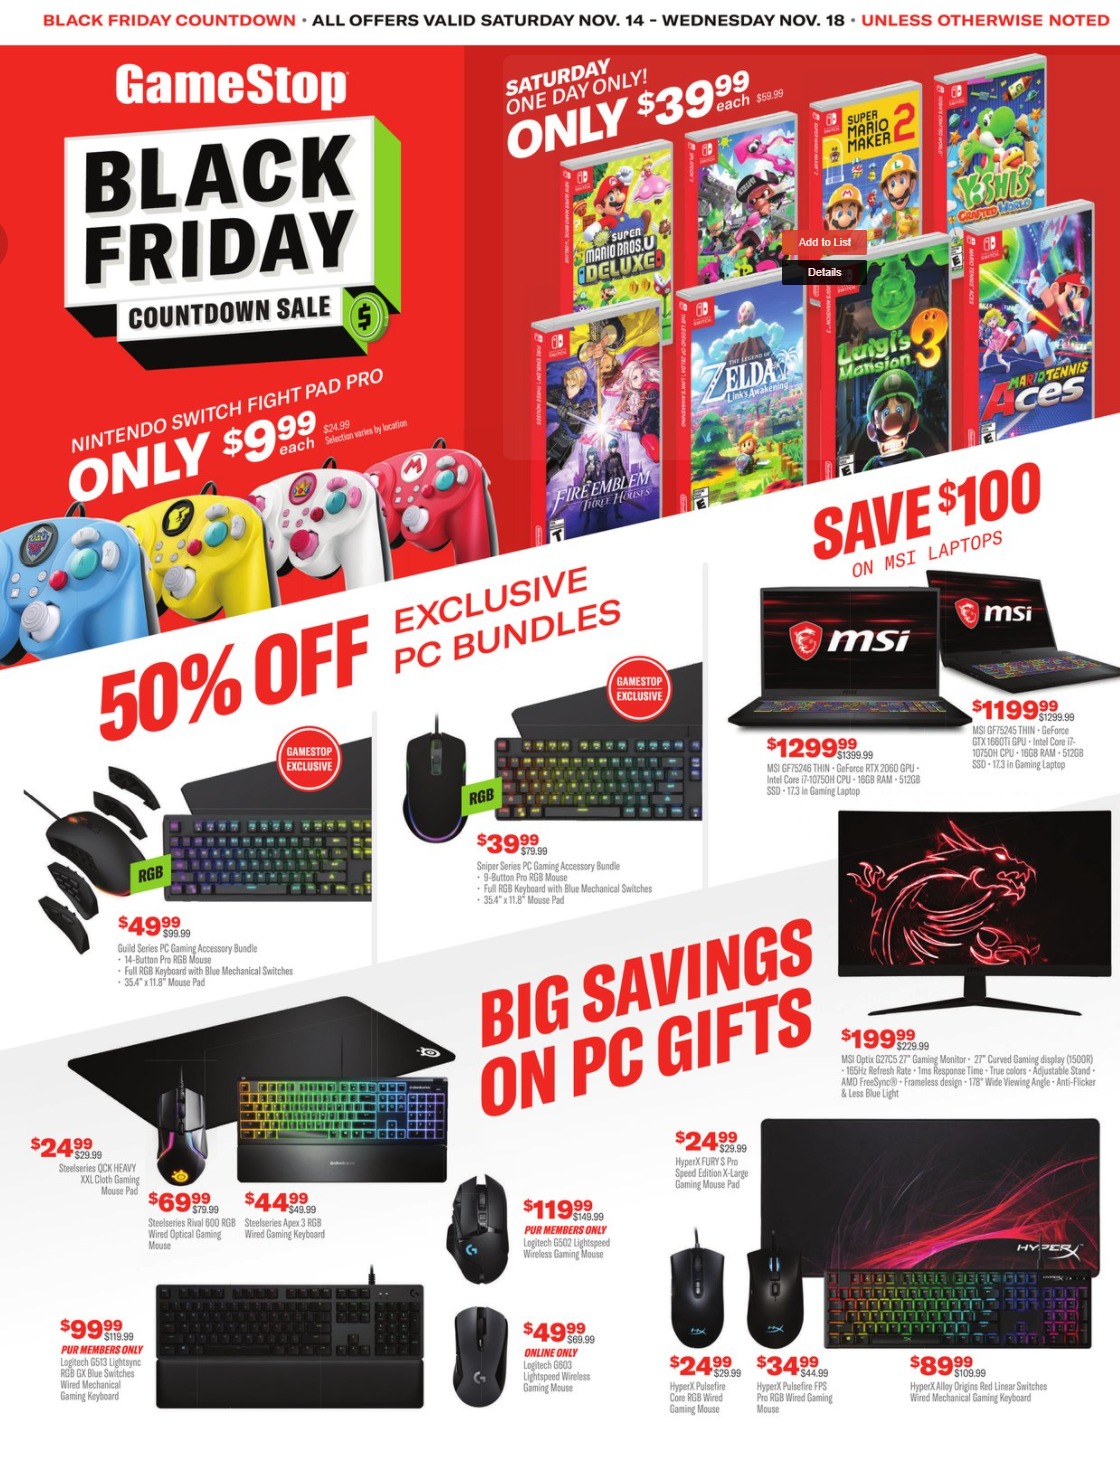 GameStop Early Black Friday Sales Ad 2020 - What Retailers Give You Black Friday Prices Early